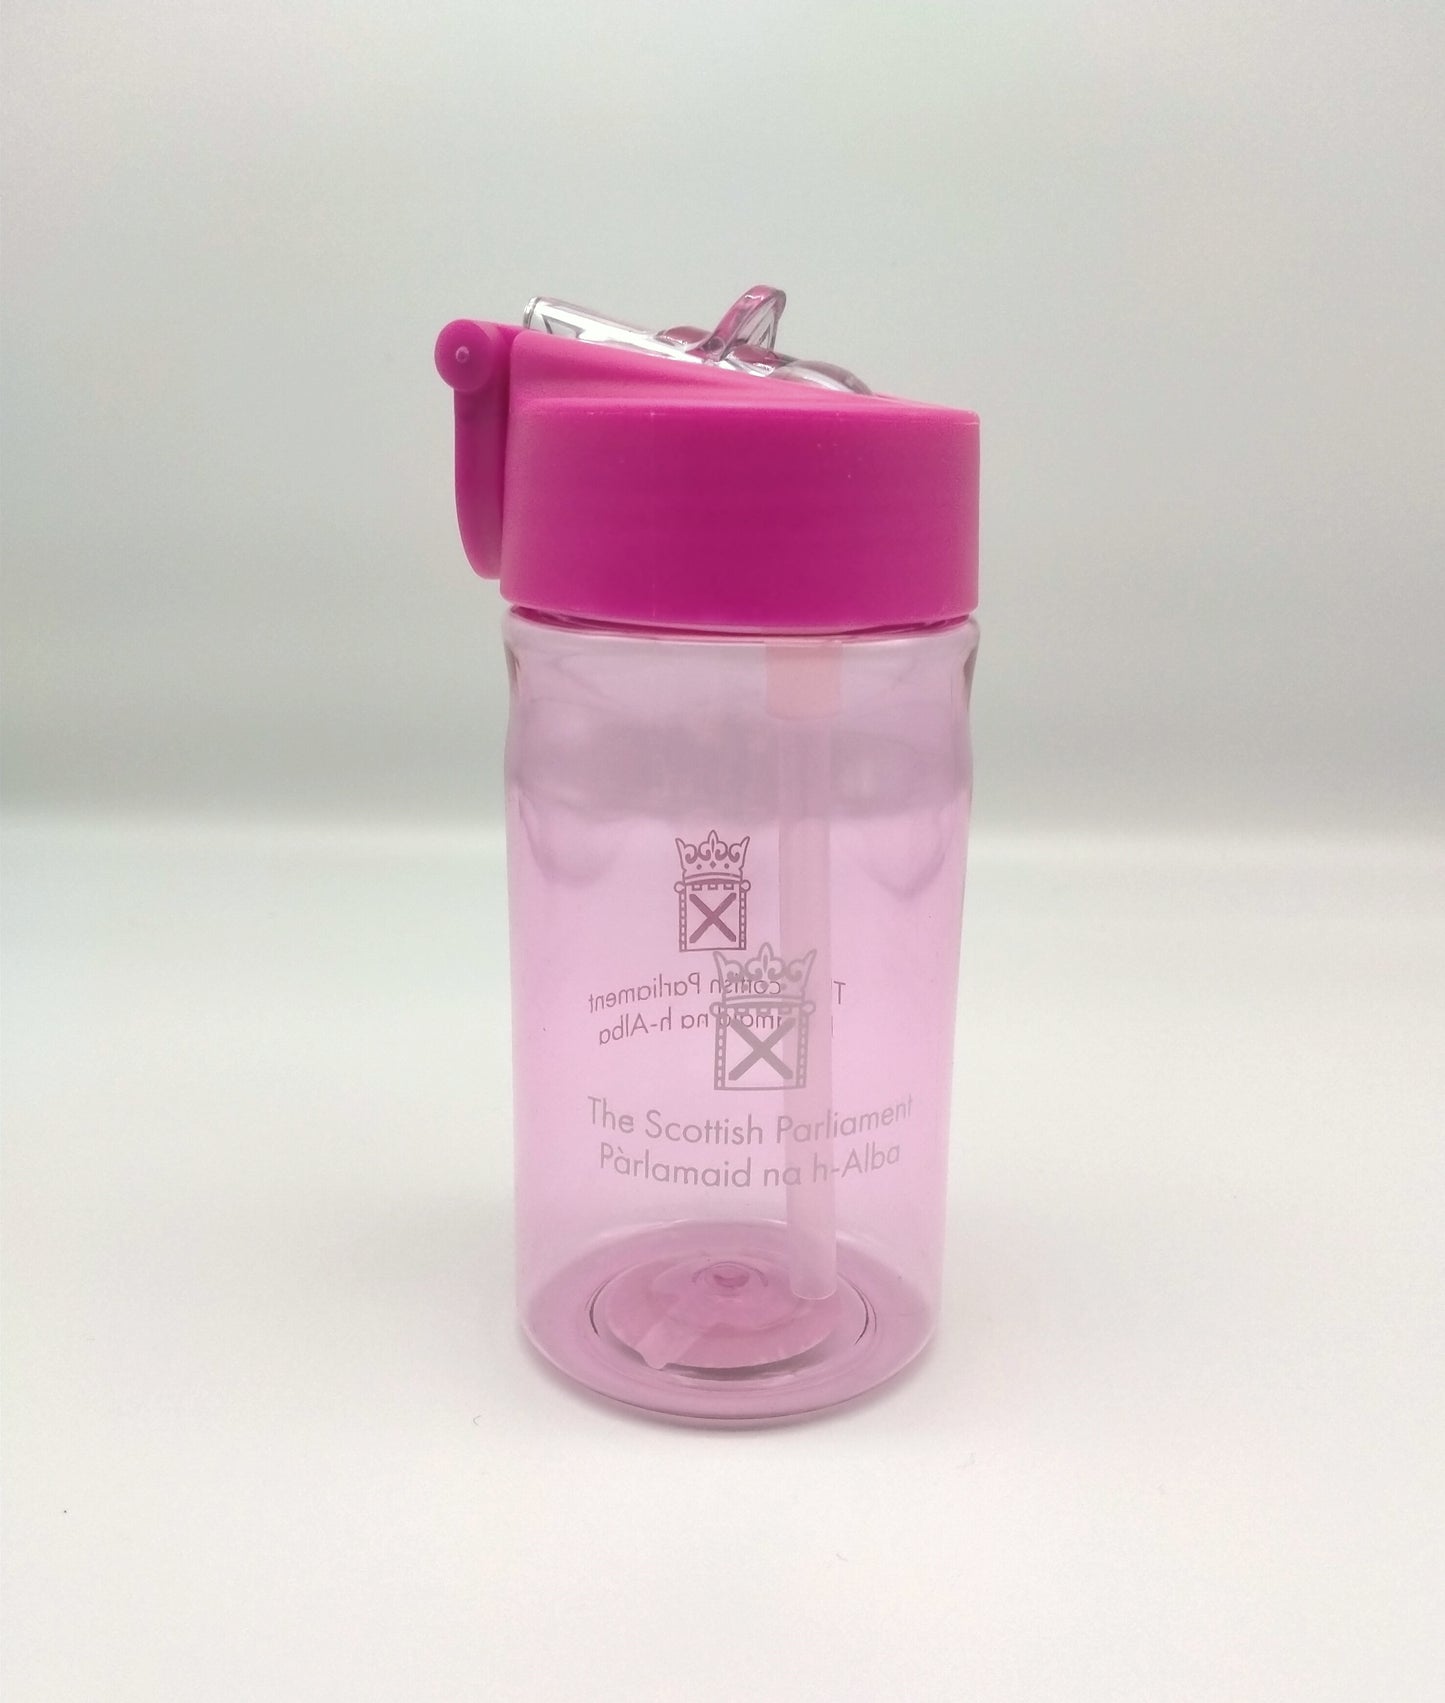 Transparent bottle tinted pink and decorated with the symbol of the Scottish Parliament. Lid is pink with a transparent pop-up spout.